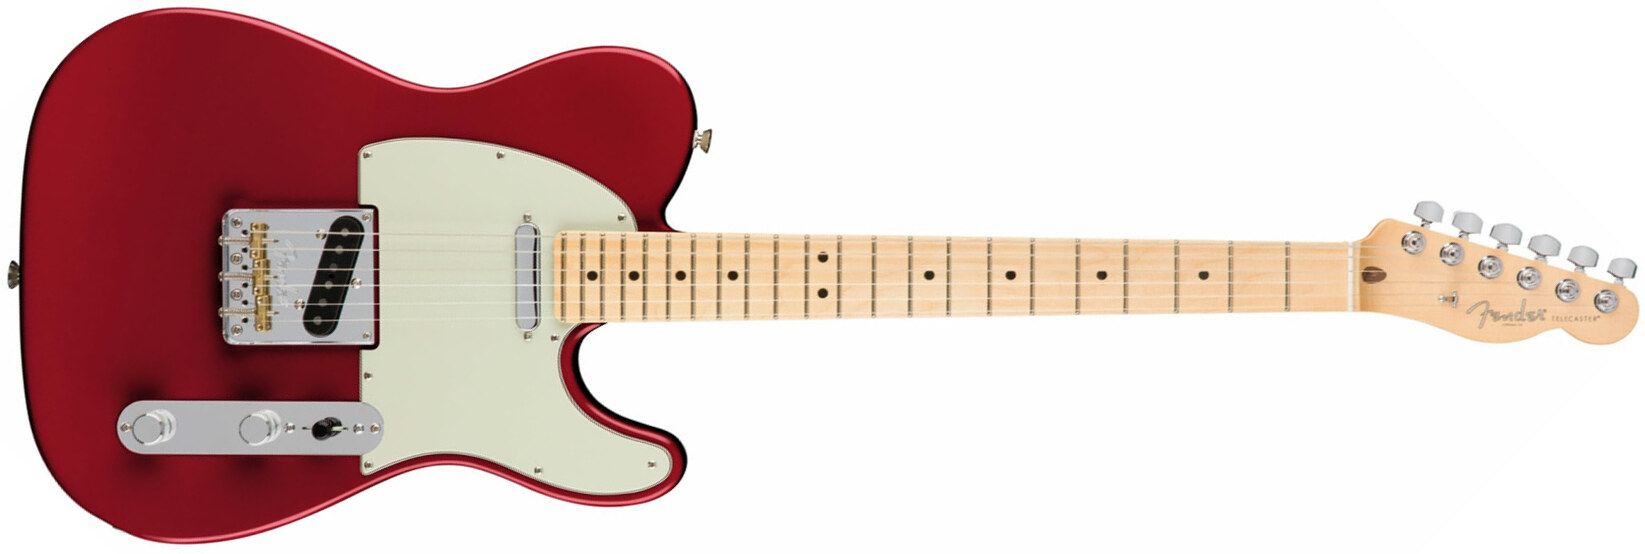 Fender Tele American Professional 2s Usa Mn - Candy Apple Red - Tel shape electric guitar - Main picture